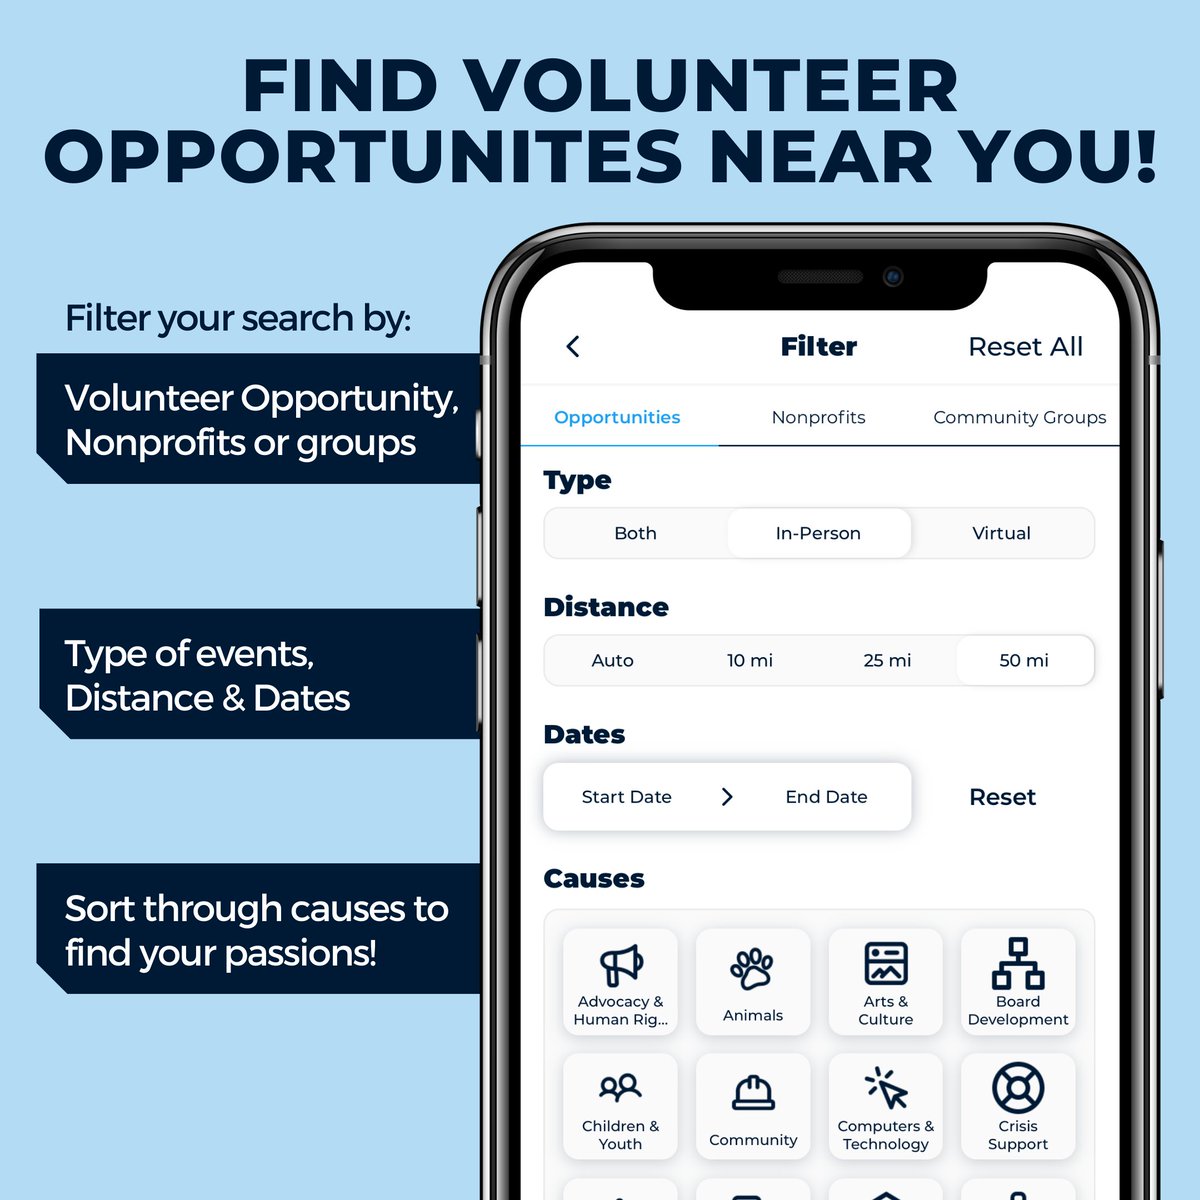 Ready to make a difference in your community? 🌟 Explore local volunteer opportunities with Rayze and filter your search for the perfect match. Your caring spirit is needed! 💙 #Volunteer #Rayze #VolunteerMatch #VolunteerWeek